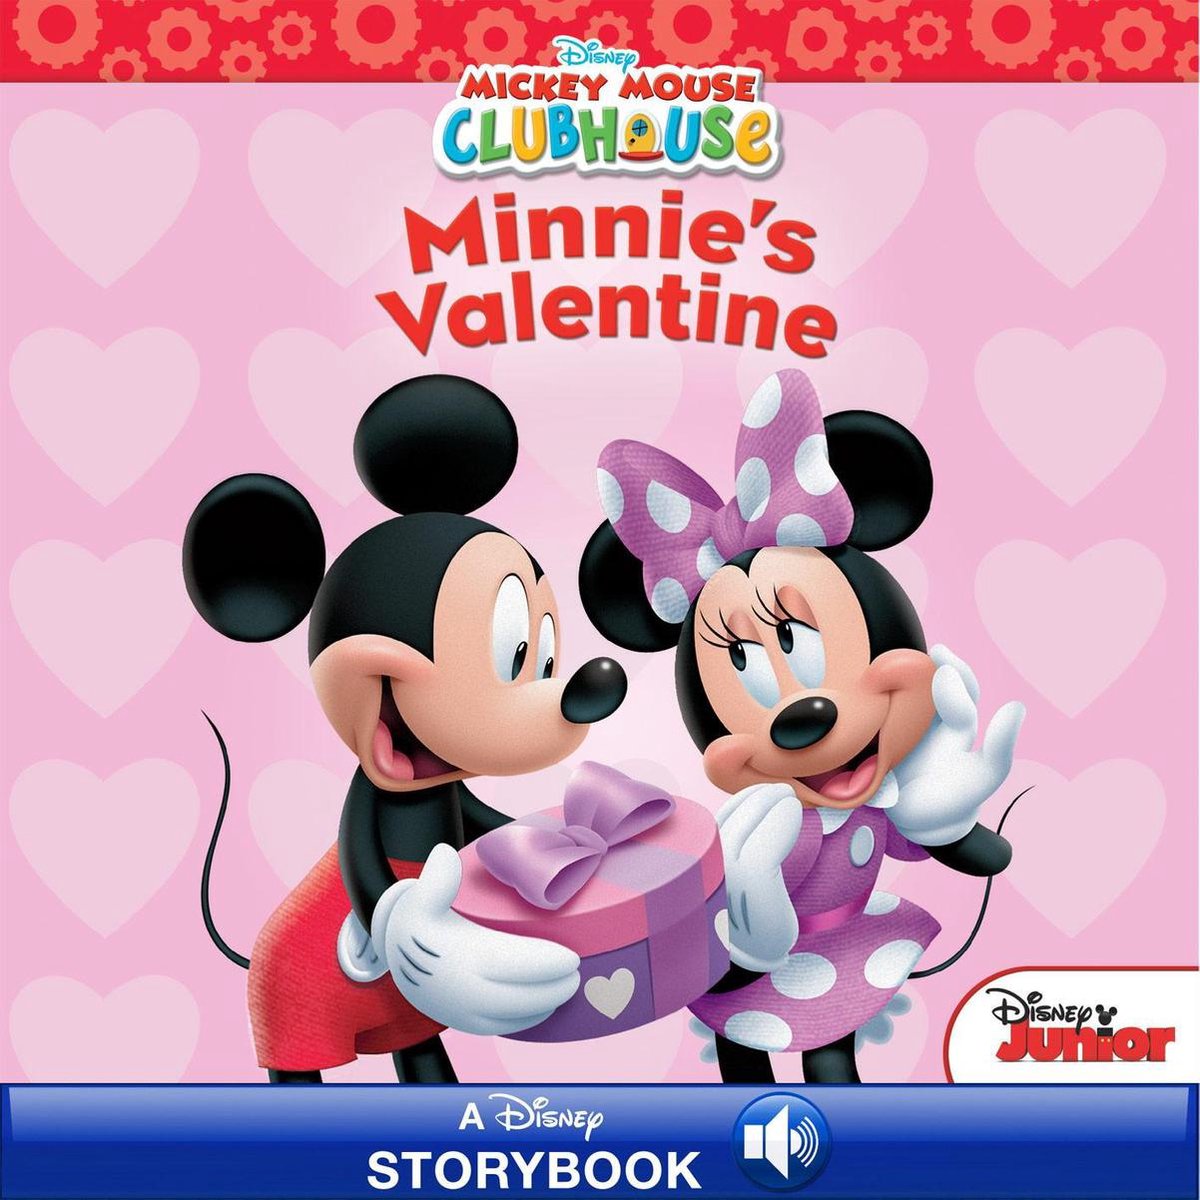 Disney Storybook with Audio (eBook) - Mickey Mouse Clubhouse: Minnie's Valentine - Sheila Sweeny Higginson